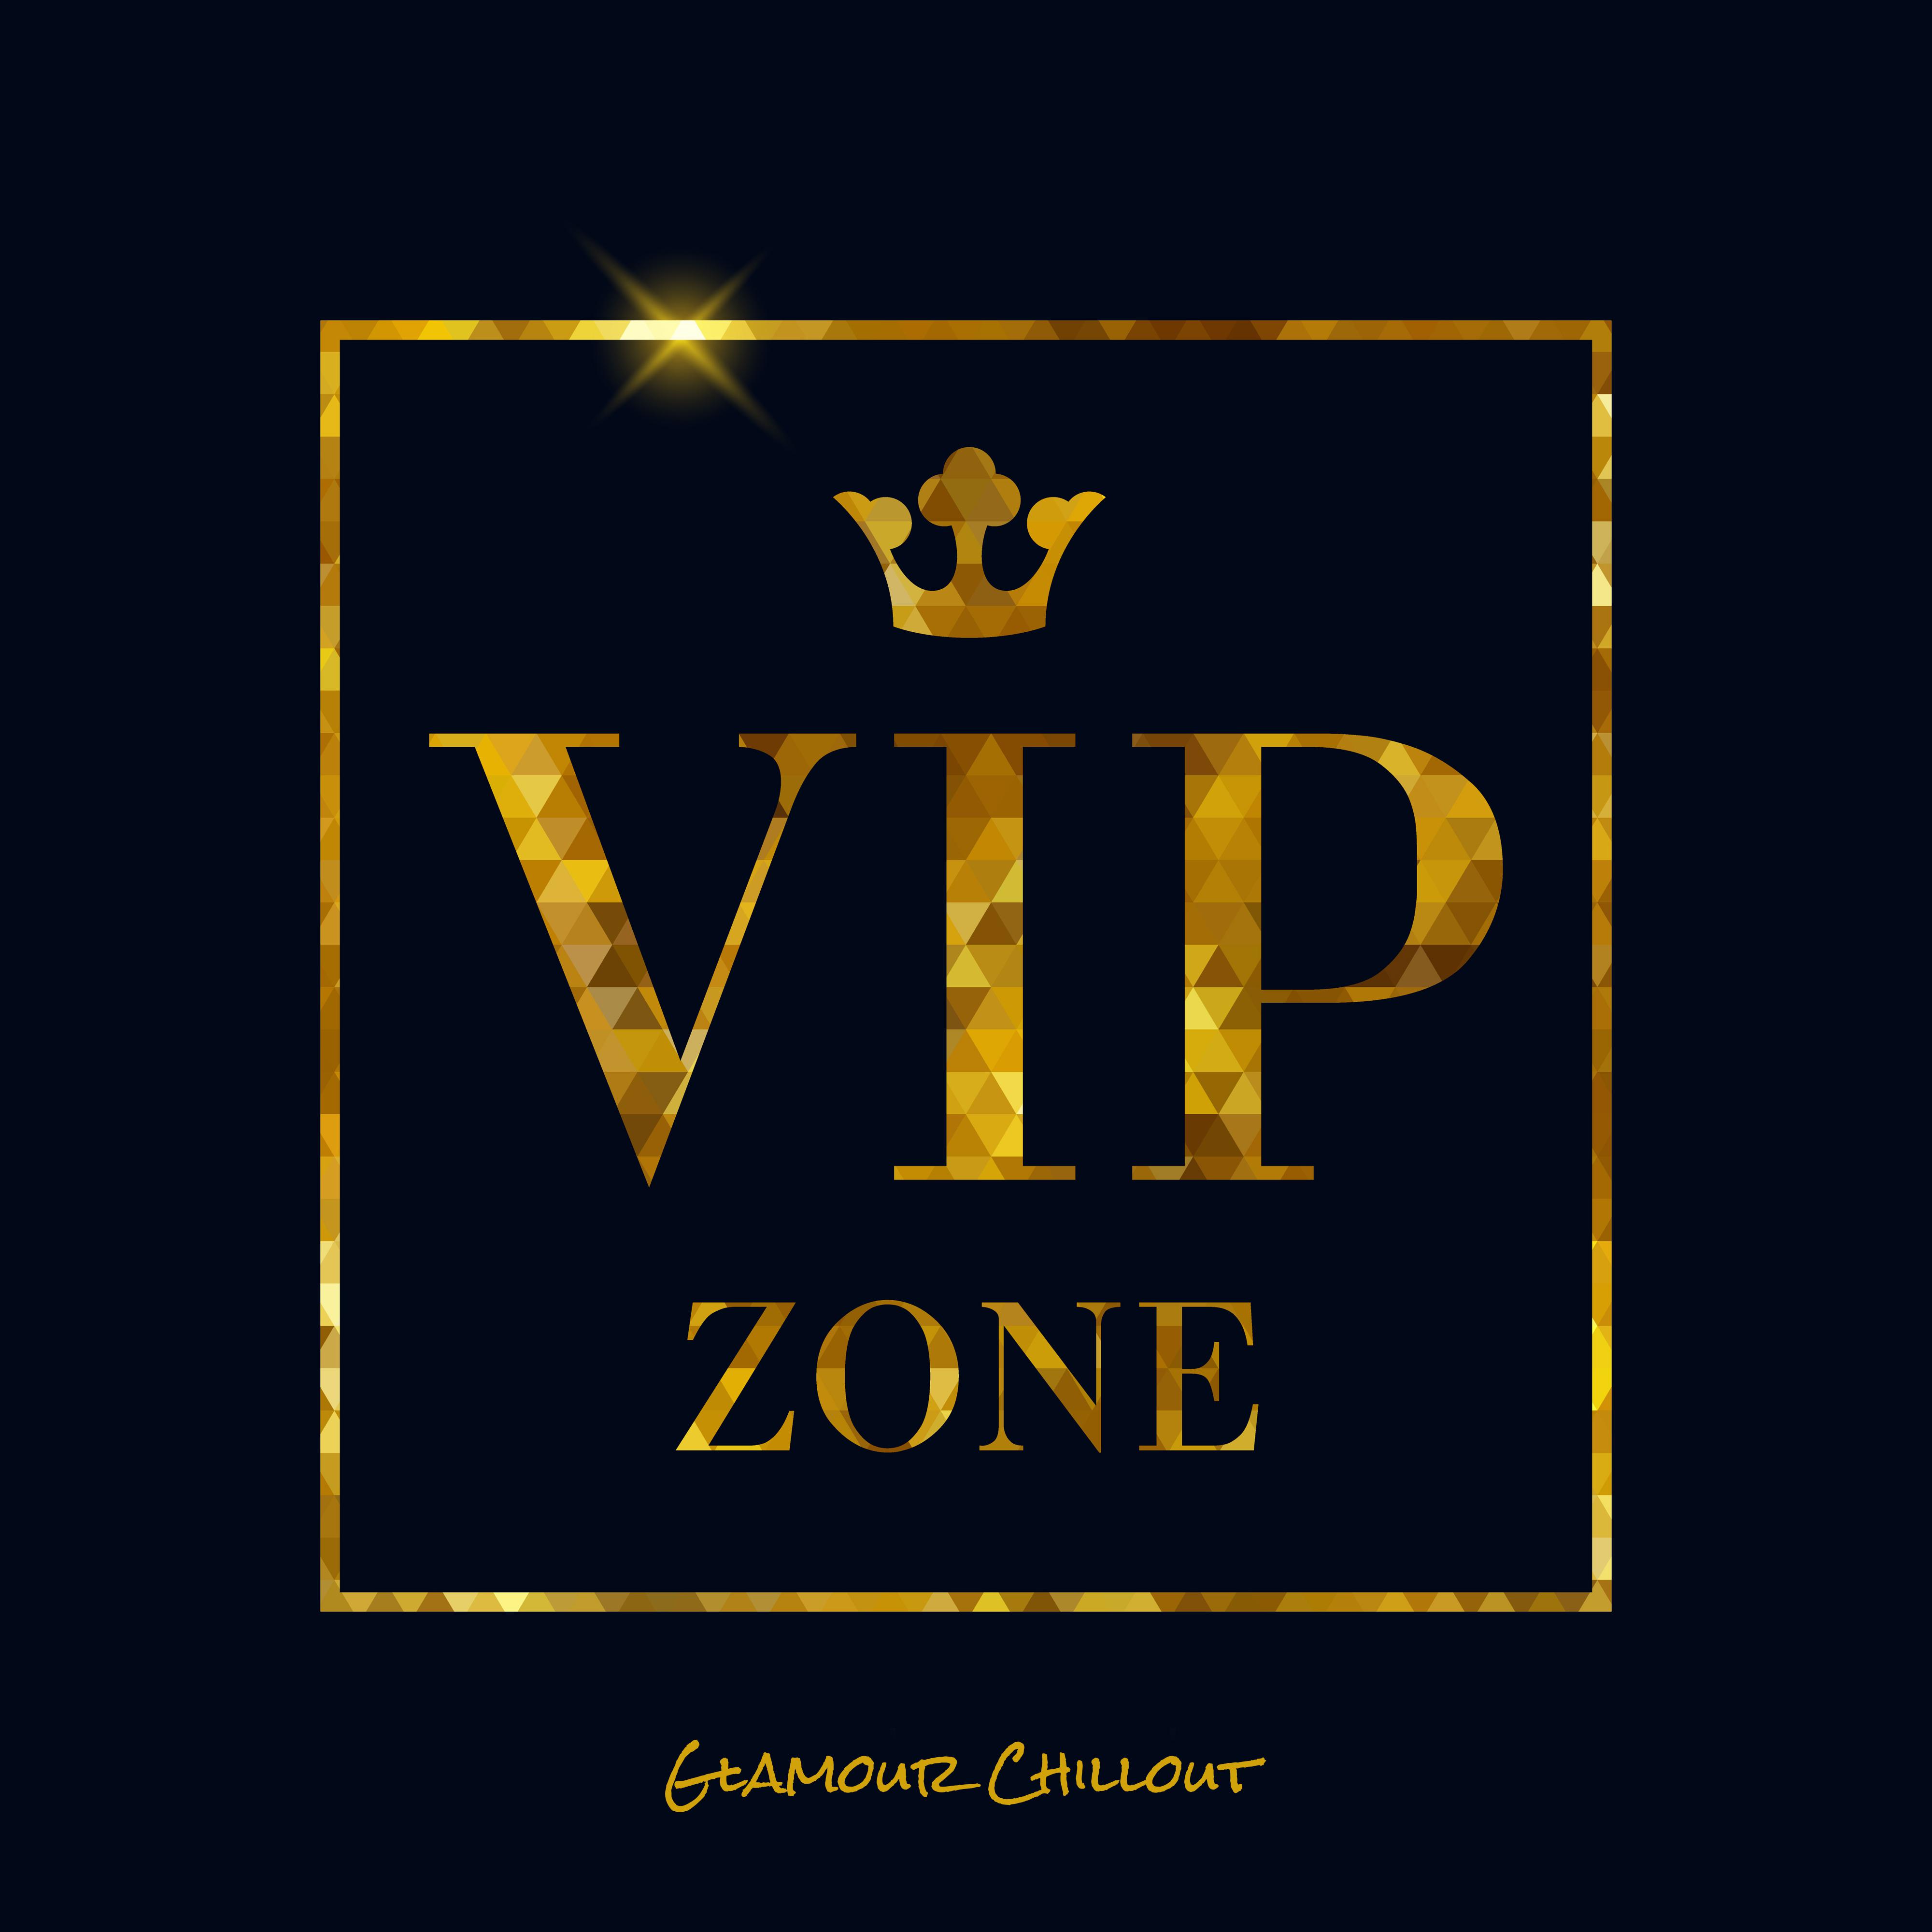 Glamour Chillout VIP Zone: 2019 Chill Out Selection of Best Party Beats, Elegant Celebrity Meeting, Hot Dance Mix of Deep Pumping Beats & Sweet Melodies